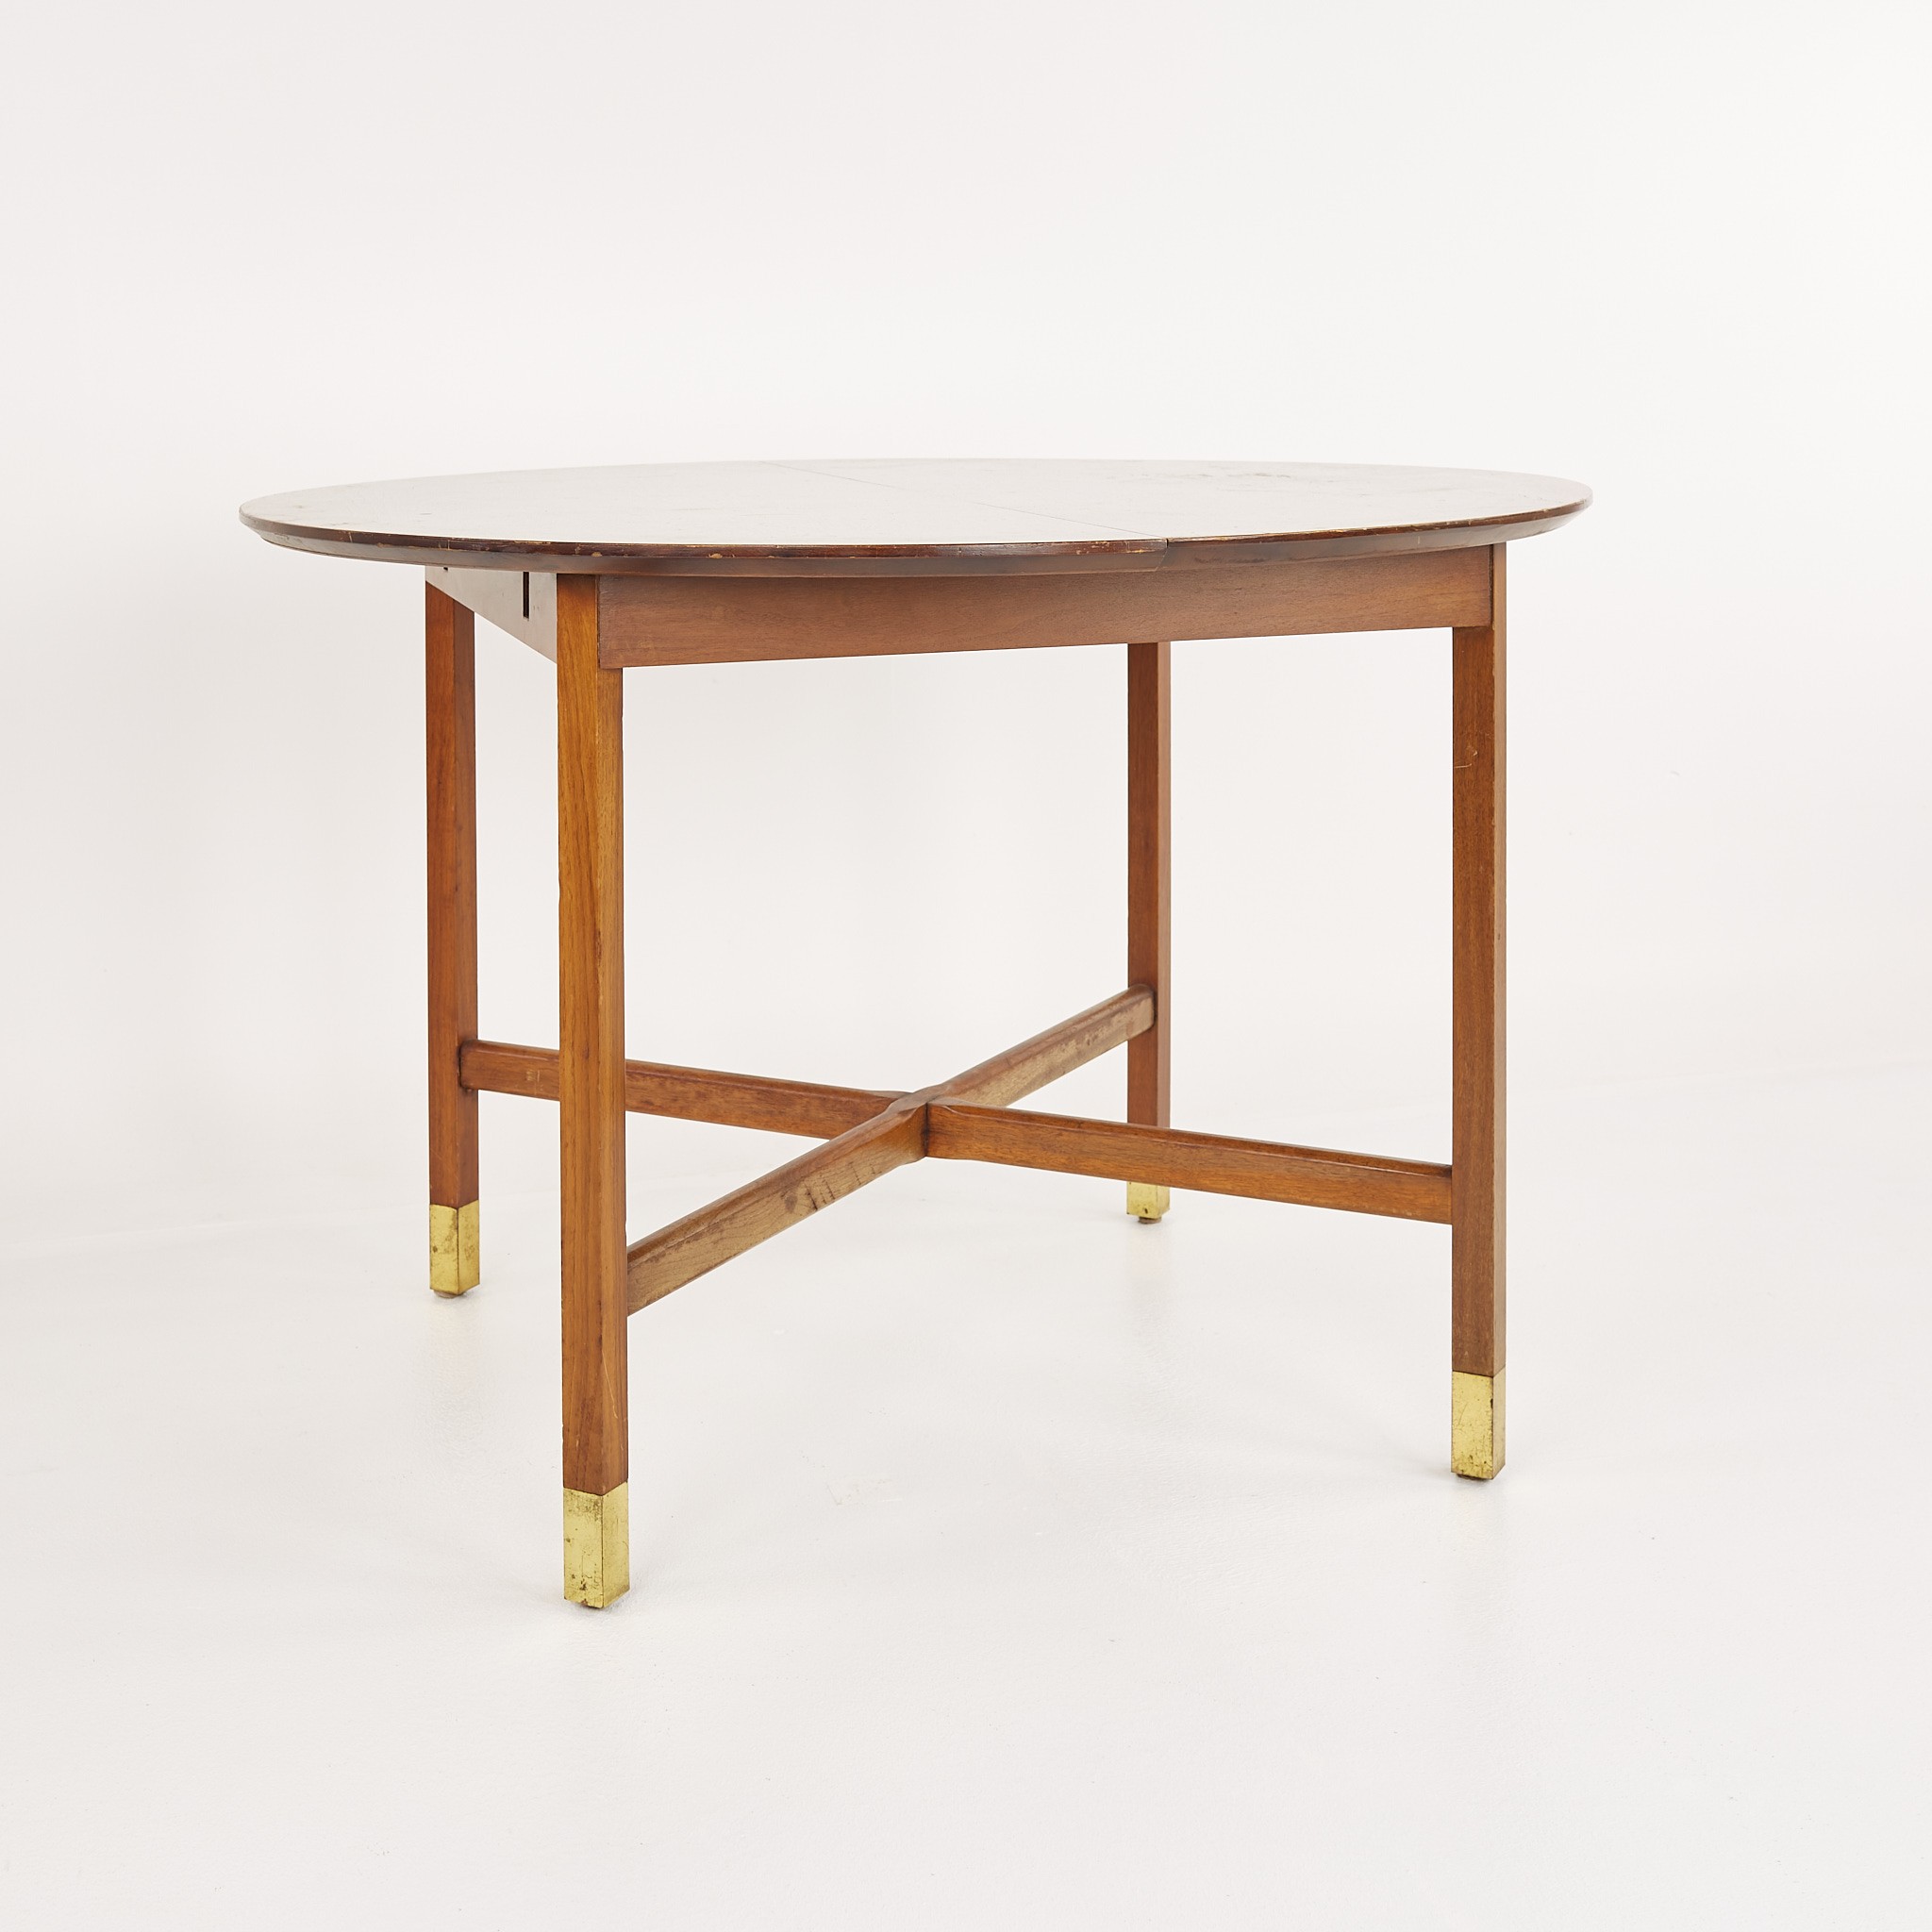 Founders Mid Century Walnut and Brass Expanding Dining Table with 1 Leaf